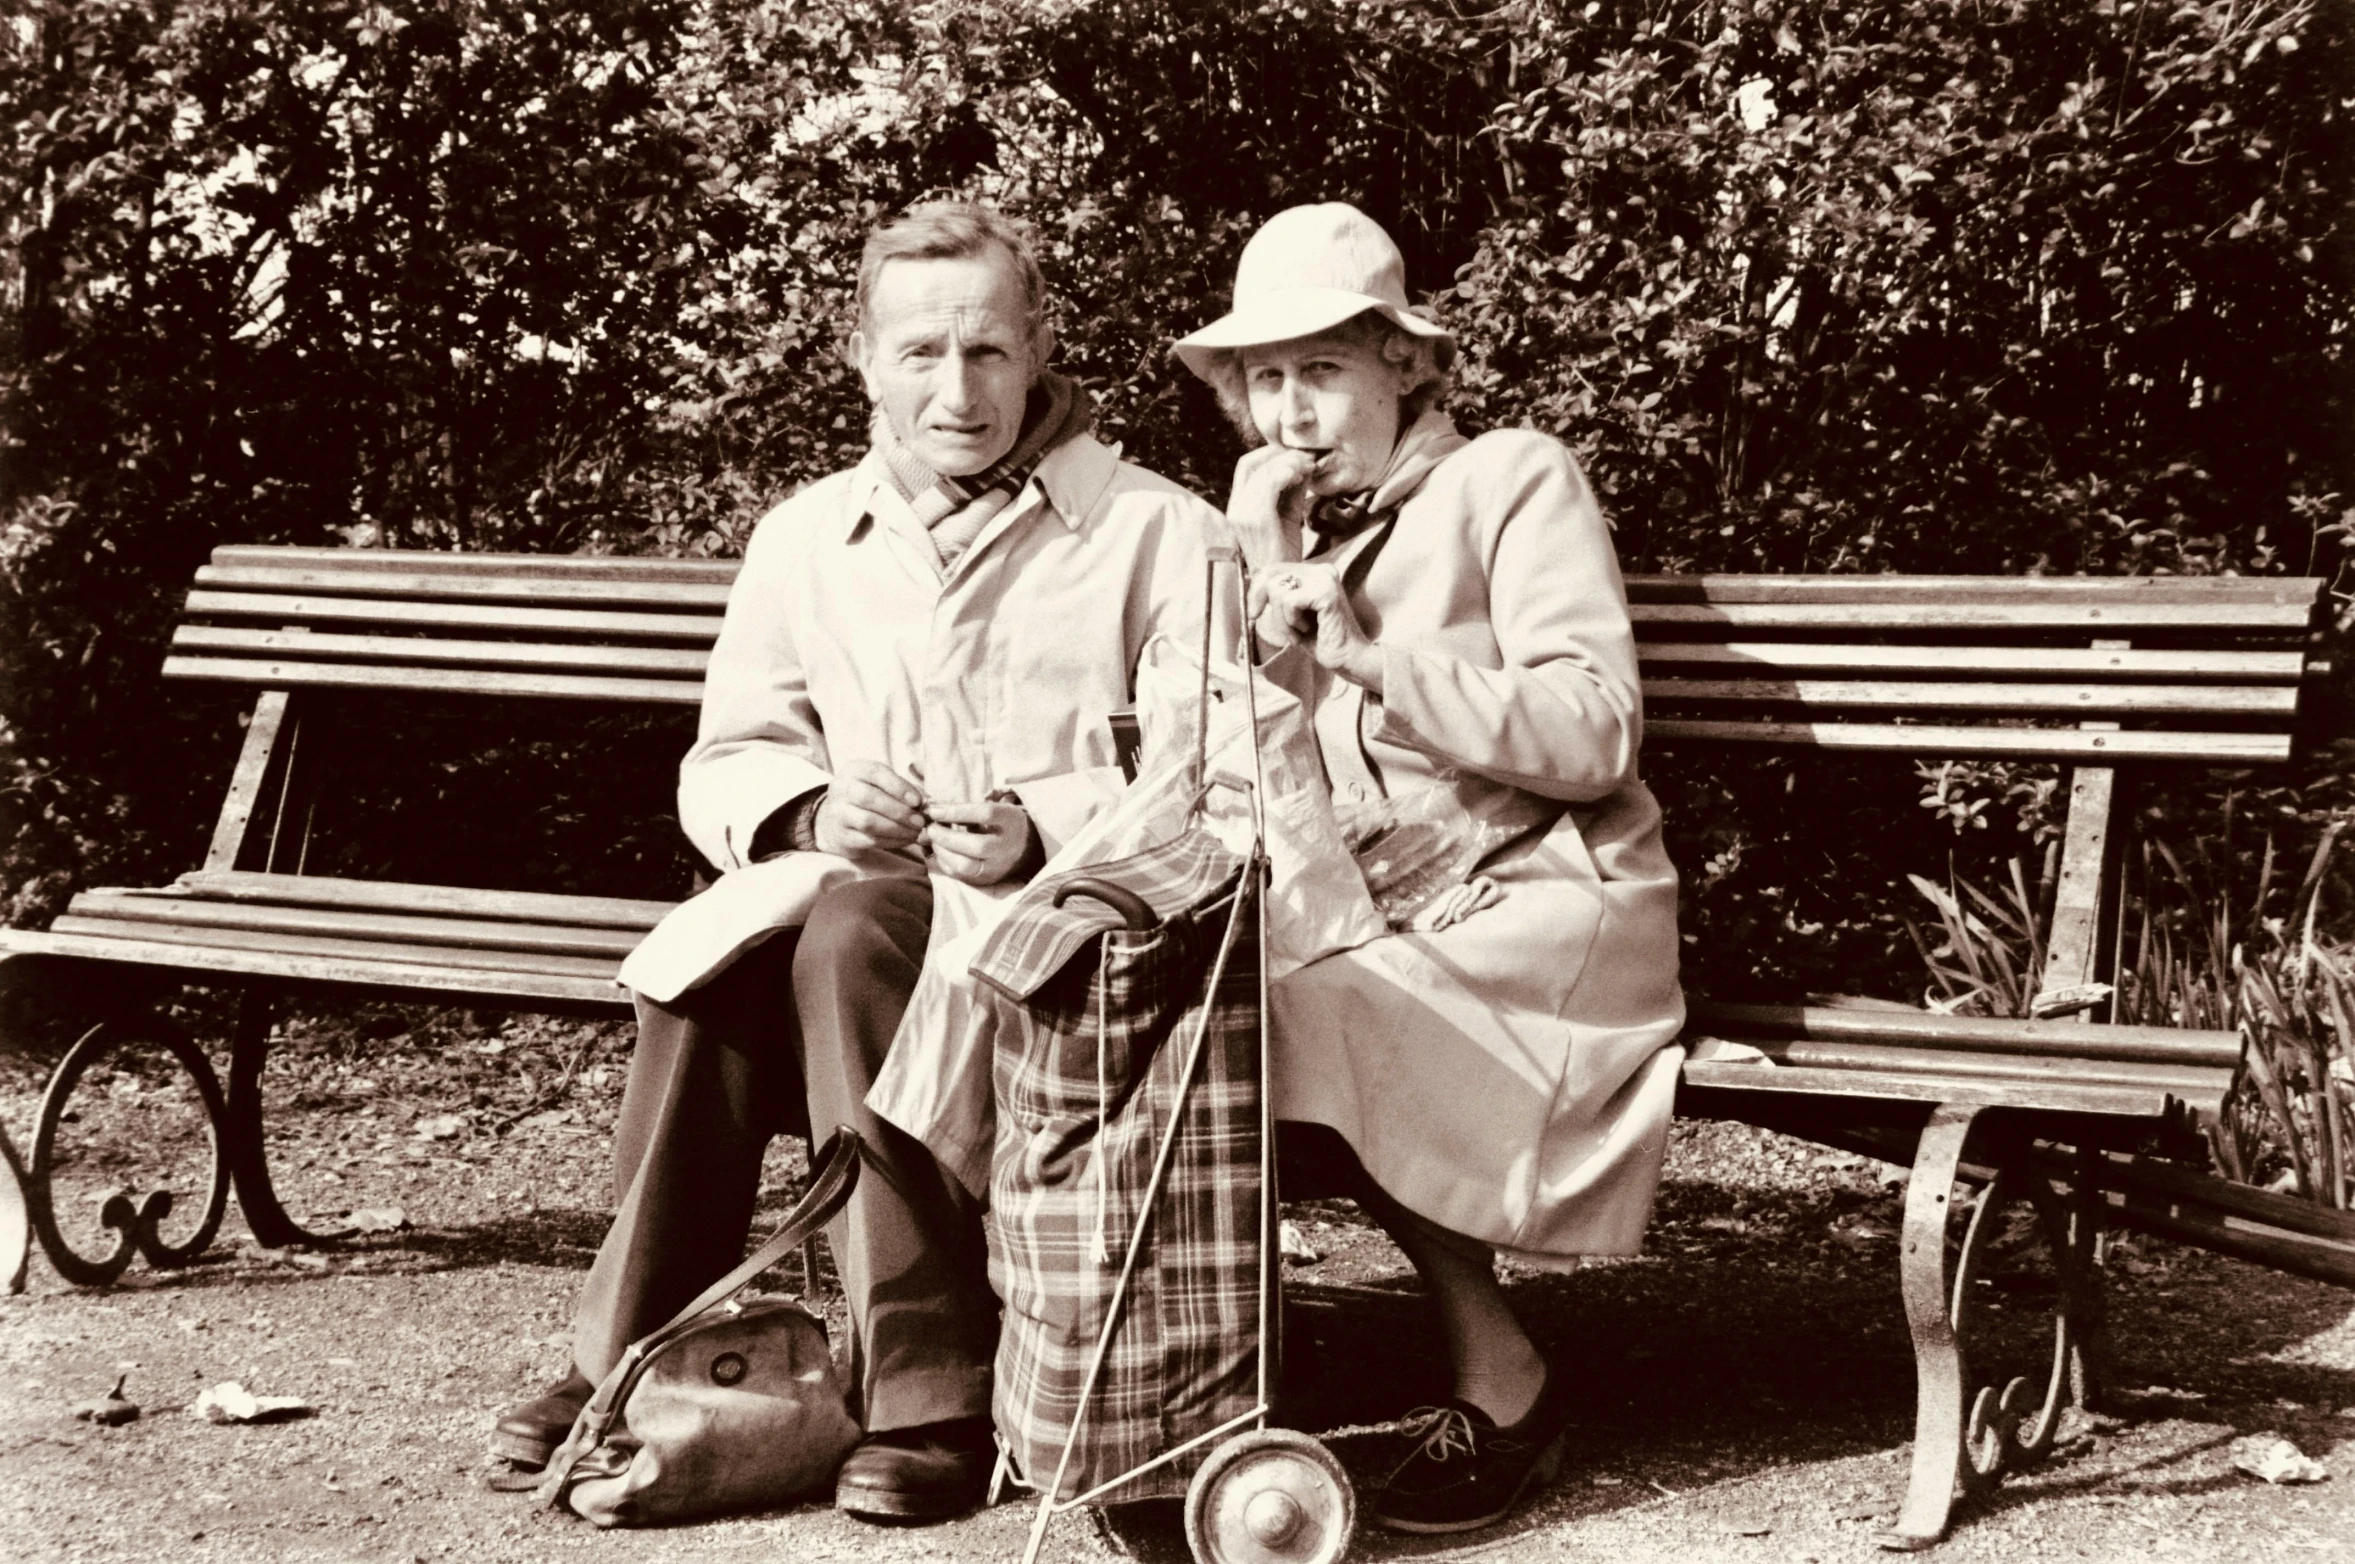 two people sitting on a bench holding their hats and looking at soing